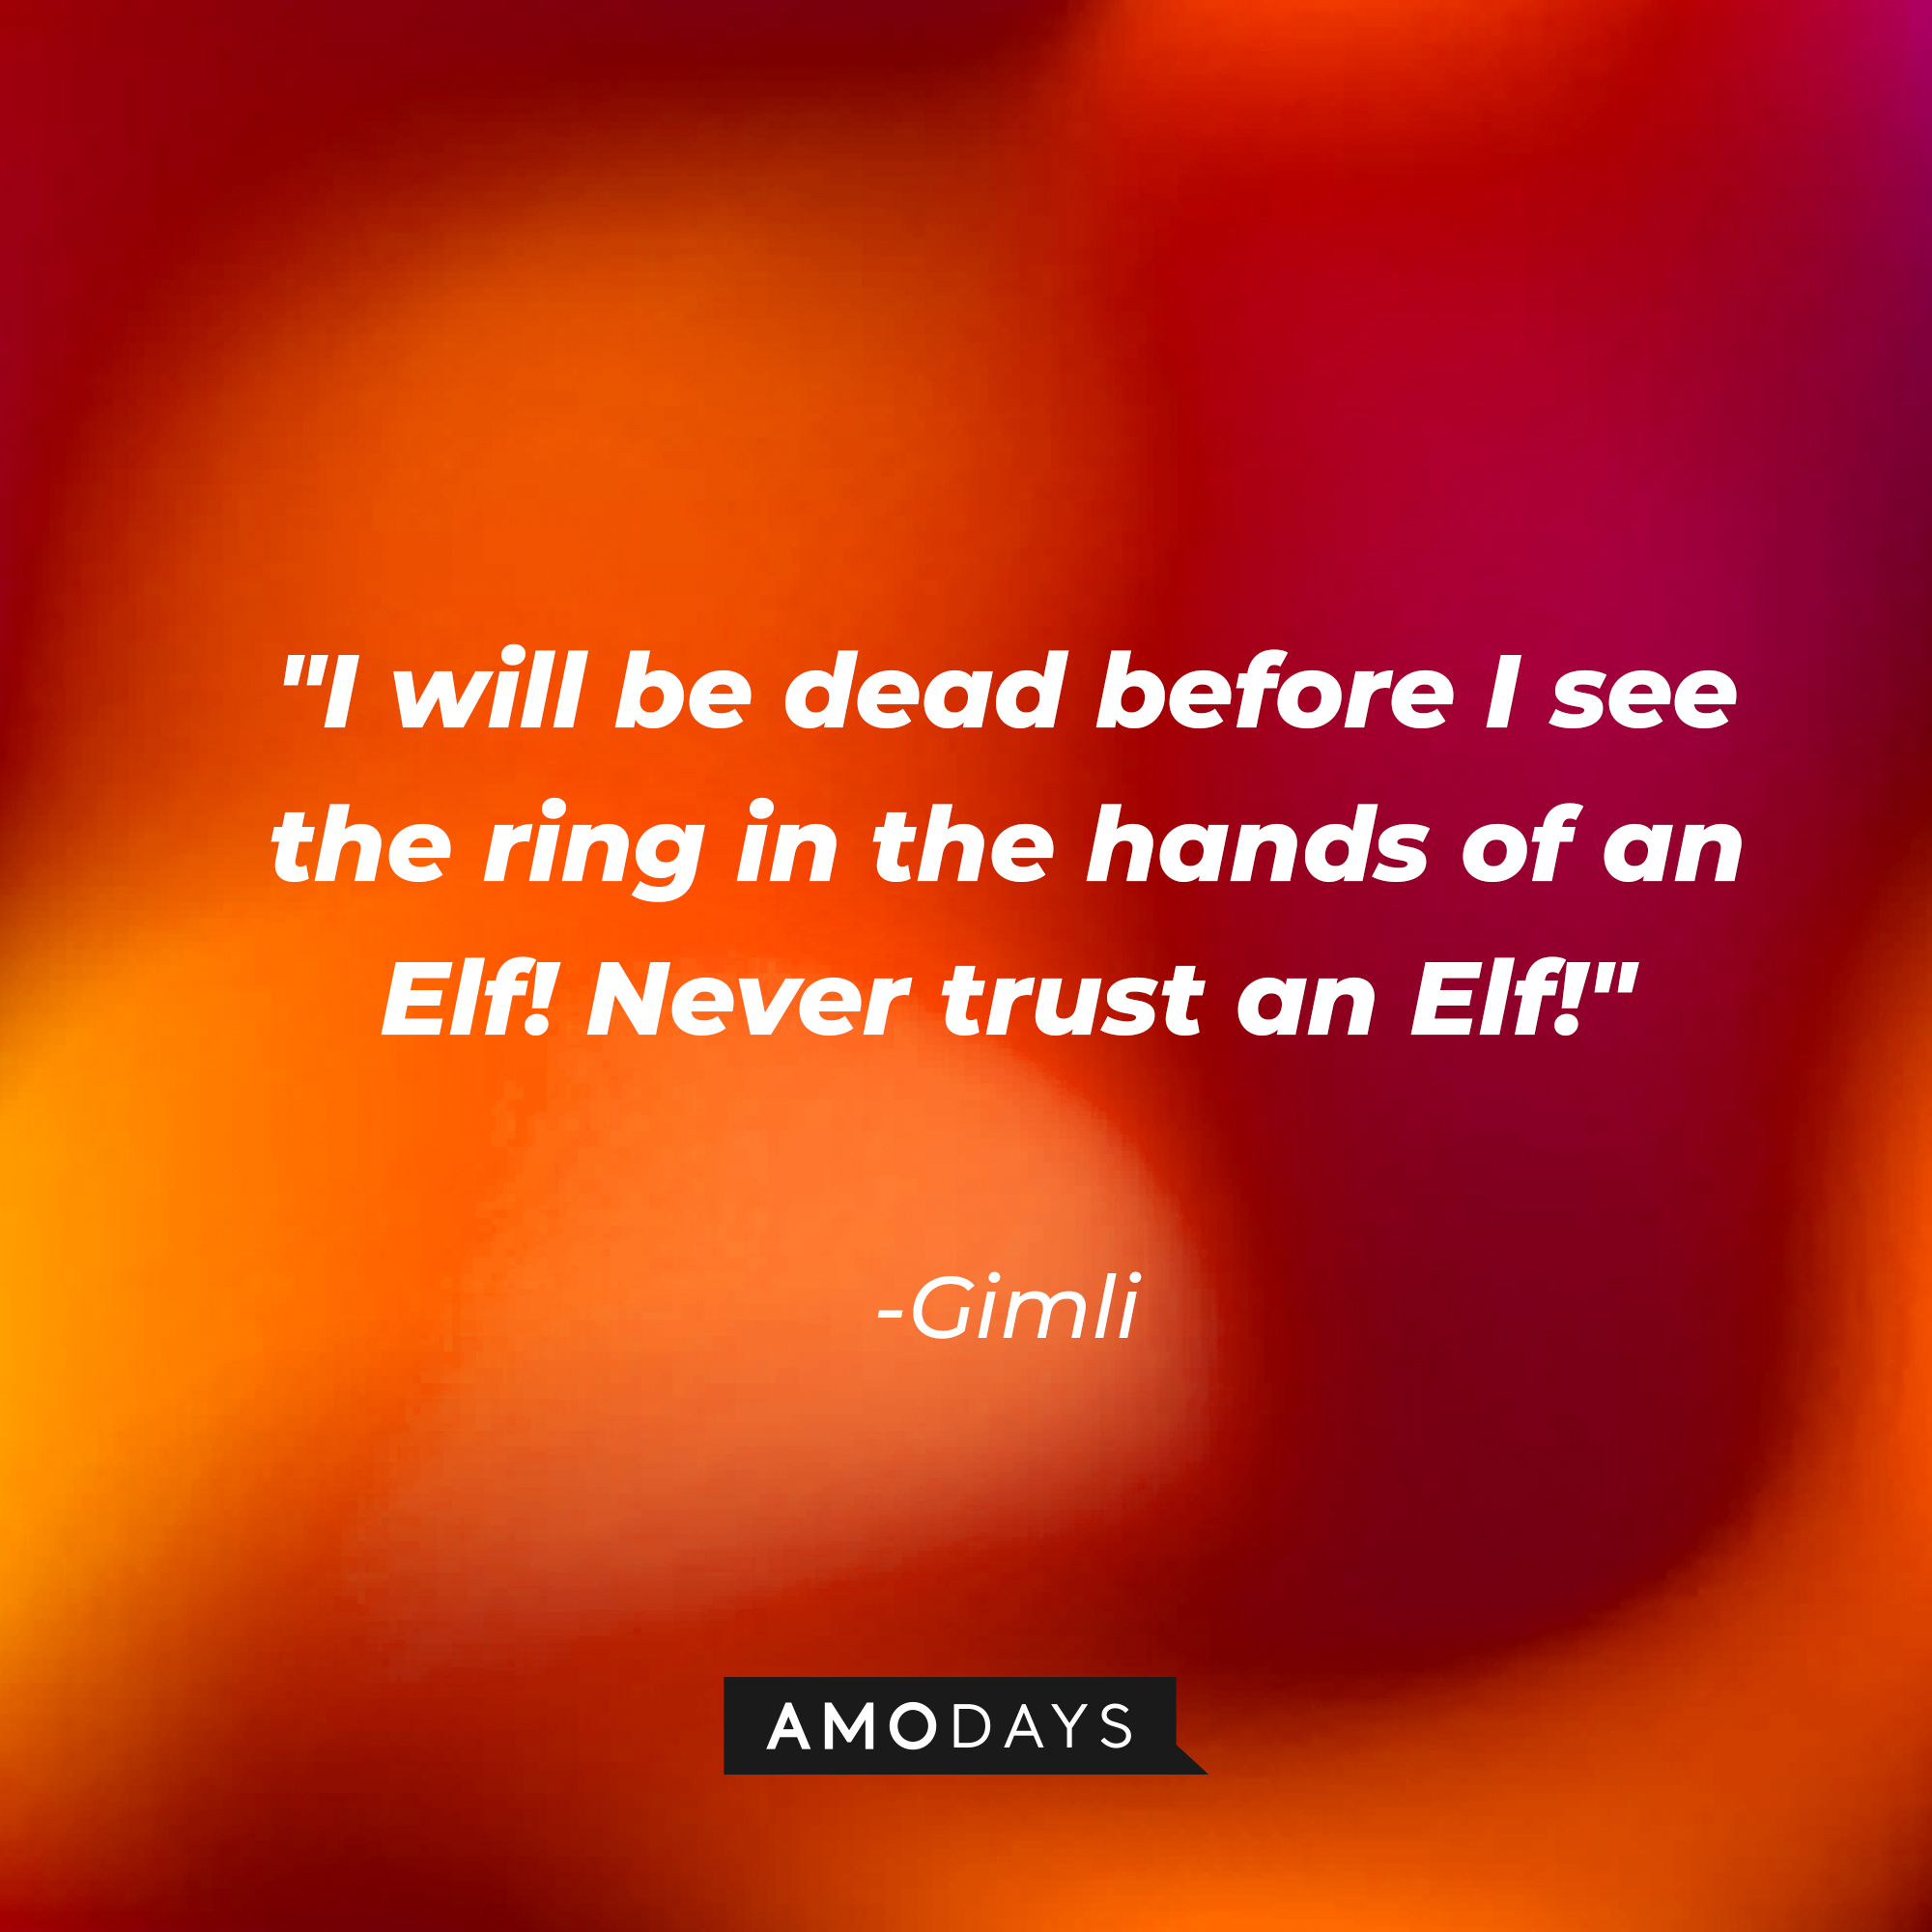 Gimli's quote: "I will be dead before I see the ring in the hands of an Elf! Never trust an Elf!" | Source: AmoDays